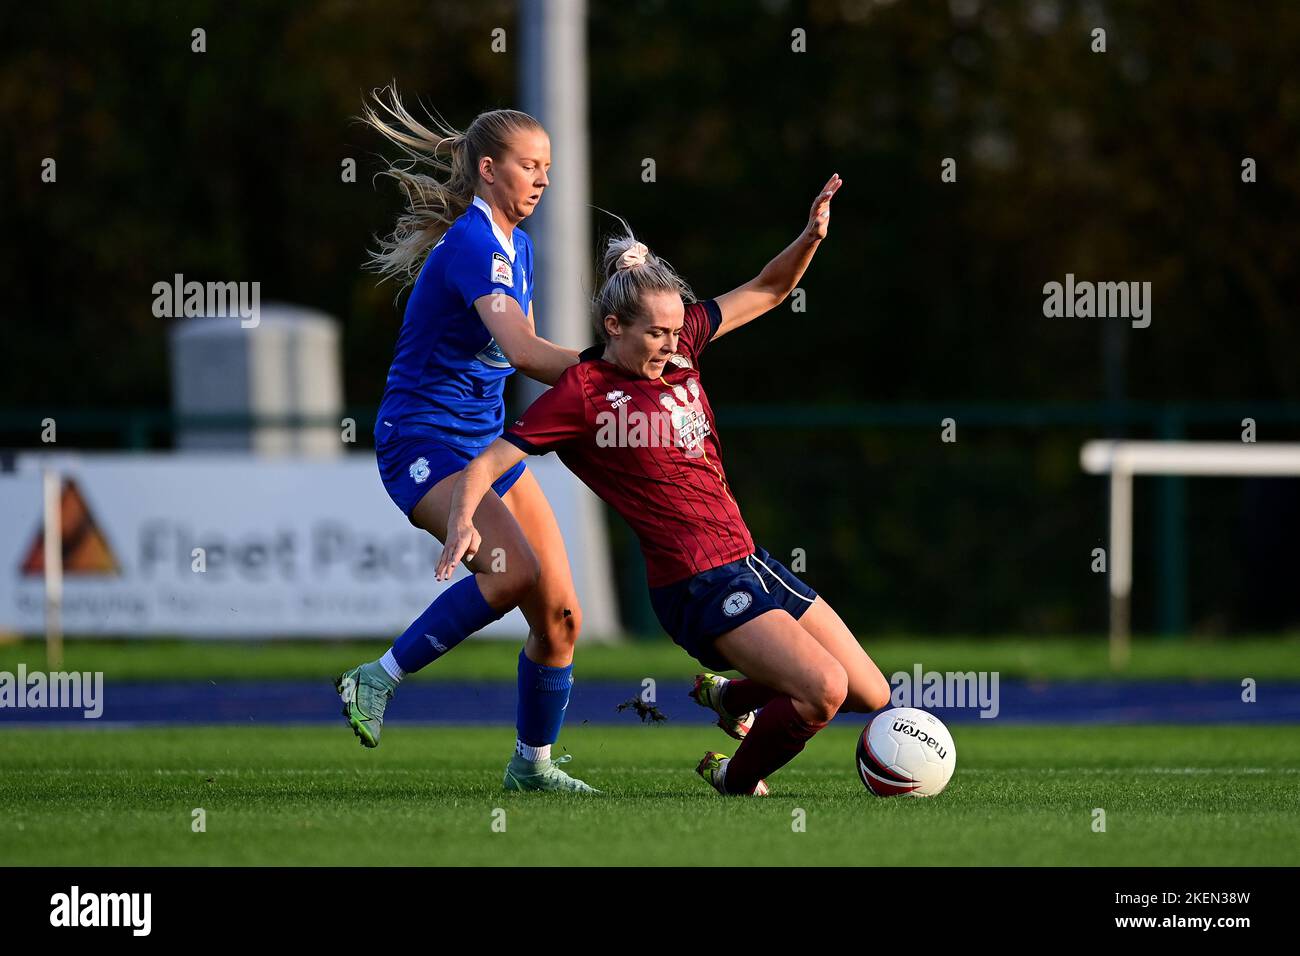 Cardiff, UK. 13th Nov, 2022. Rhianne Oakley of Cardiff City Women's vies for possession with Robyn Pinder of Cardiff Met WFC - Mandatory by-line Credit: Ashley Crowden/Alamy Live News Stock Photo